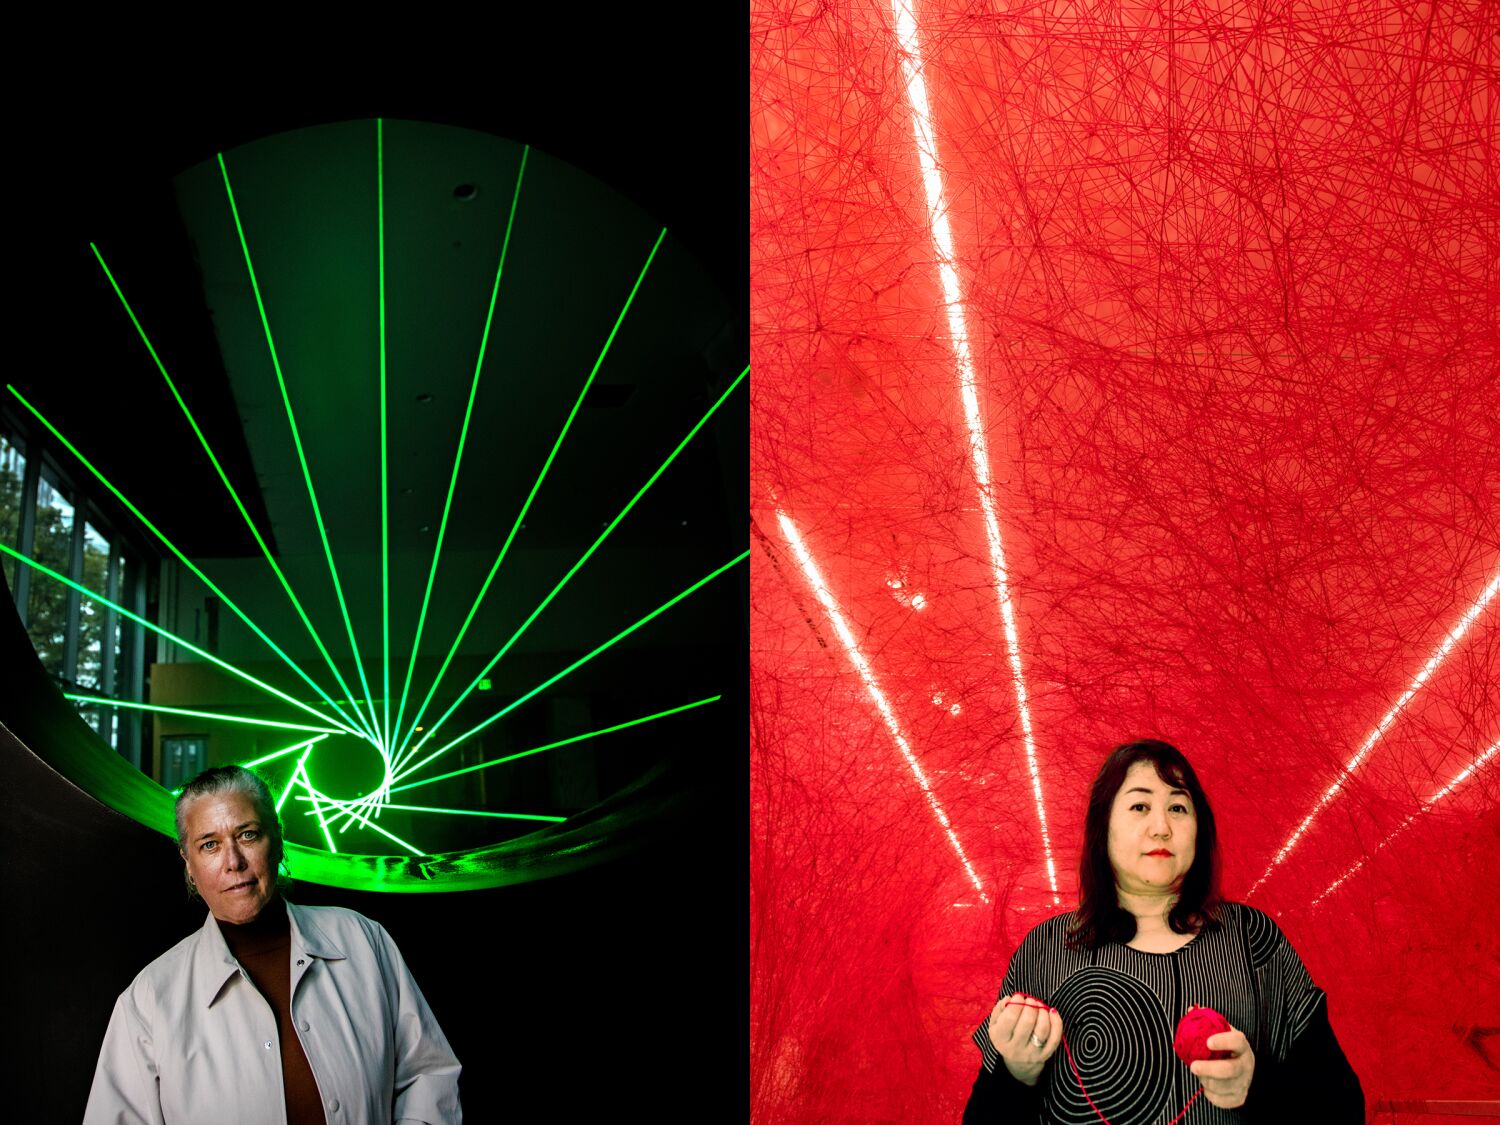 16 high-intensity lasers, 800 pounds of blood-red yarn: The Hammer goes big in new immersive spaces